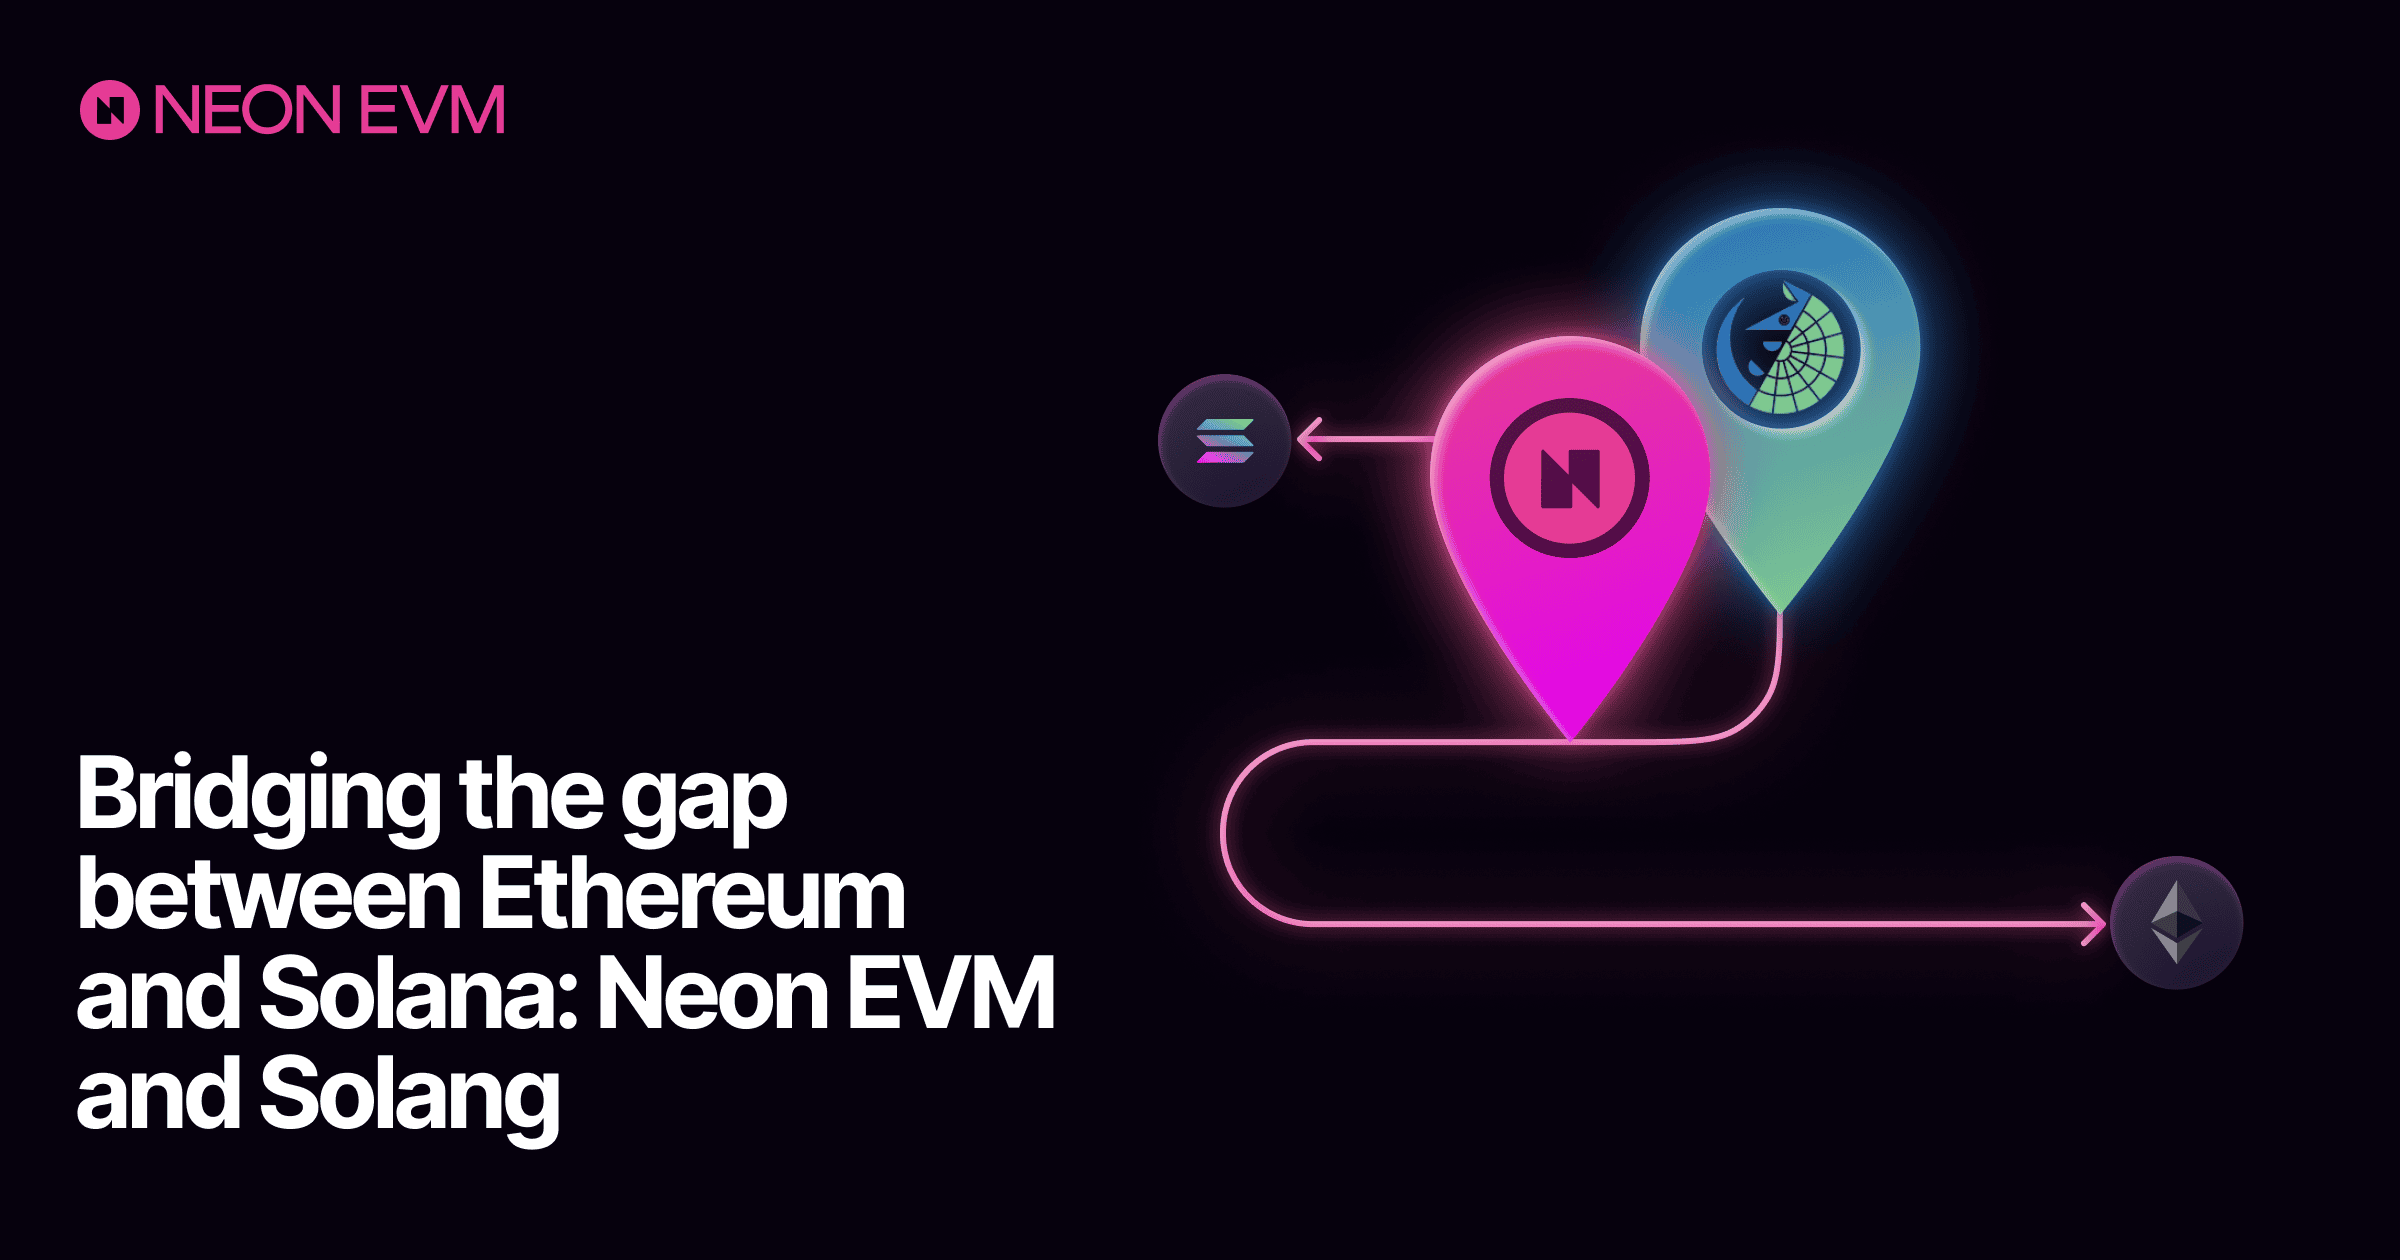 Bridging the gap between Ethereum and Solana: Neon EVM and Solang